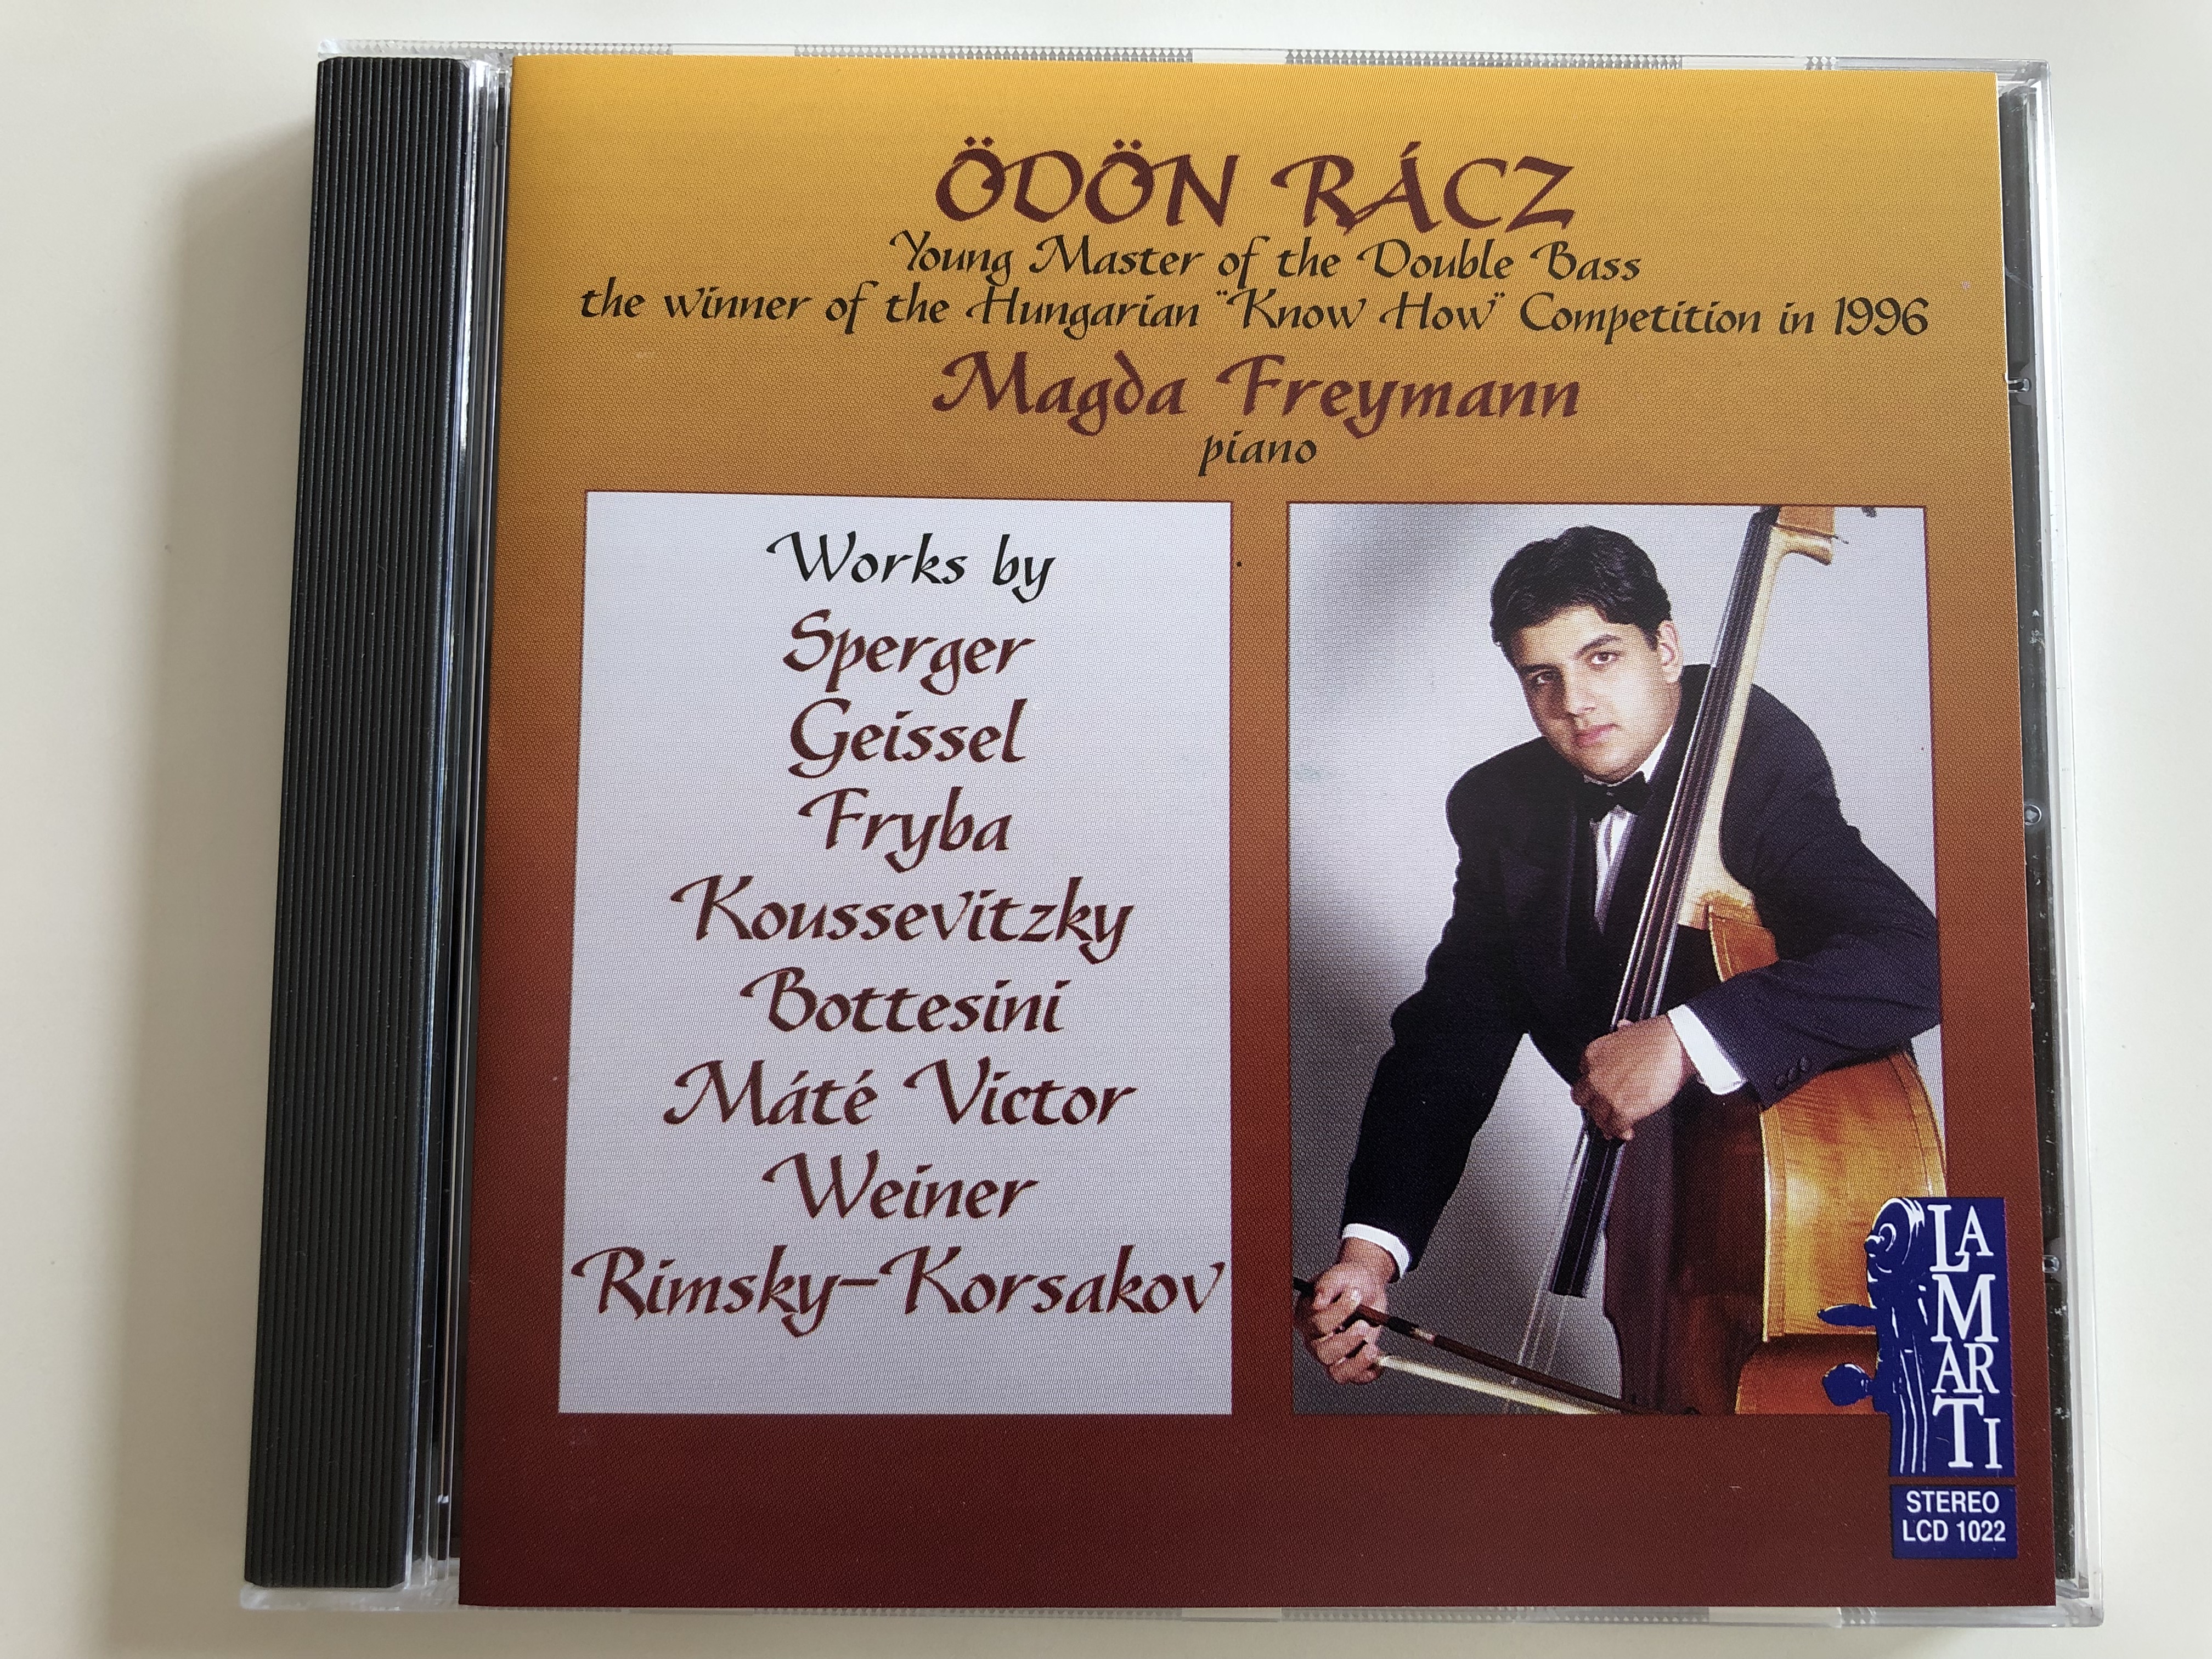 d-n-r-cz-young-master-of-the-double-bass-the-winner-of-the-hungarian-know-how-competition-in-1996-piano-magda-freymann-works-by-sperger-geissel-fryba-koussevitzky-bottesini-mate-vic-1-.jpg